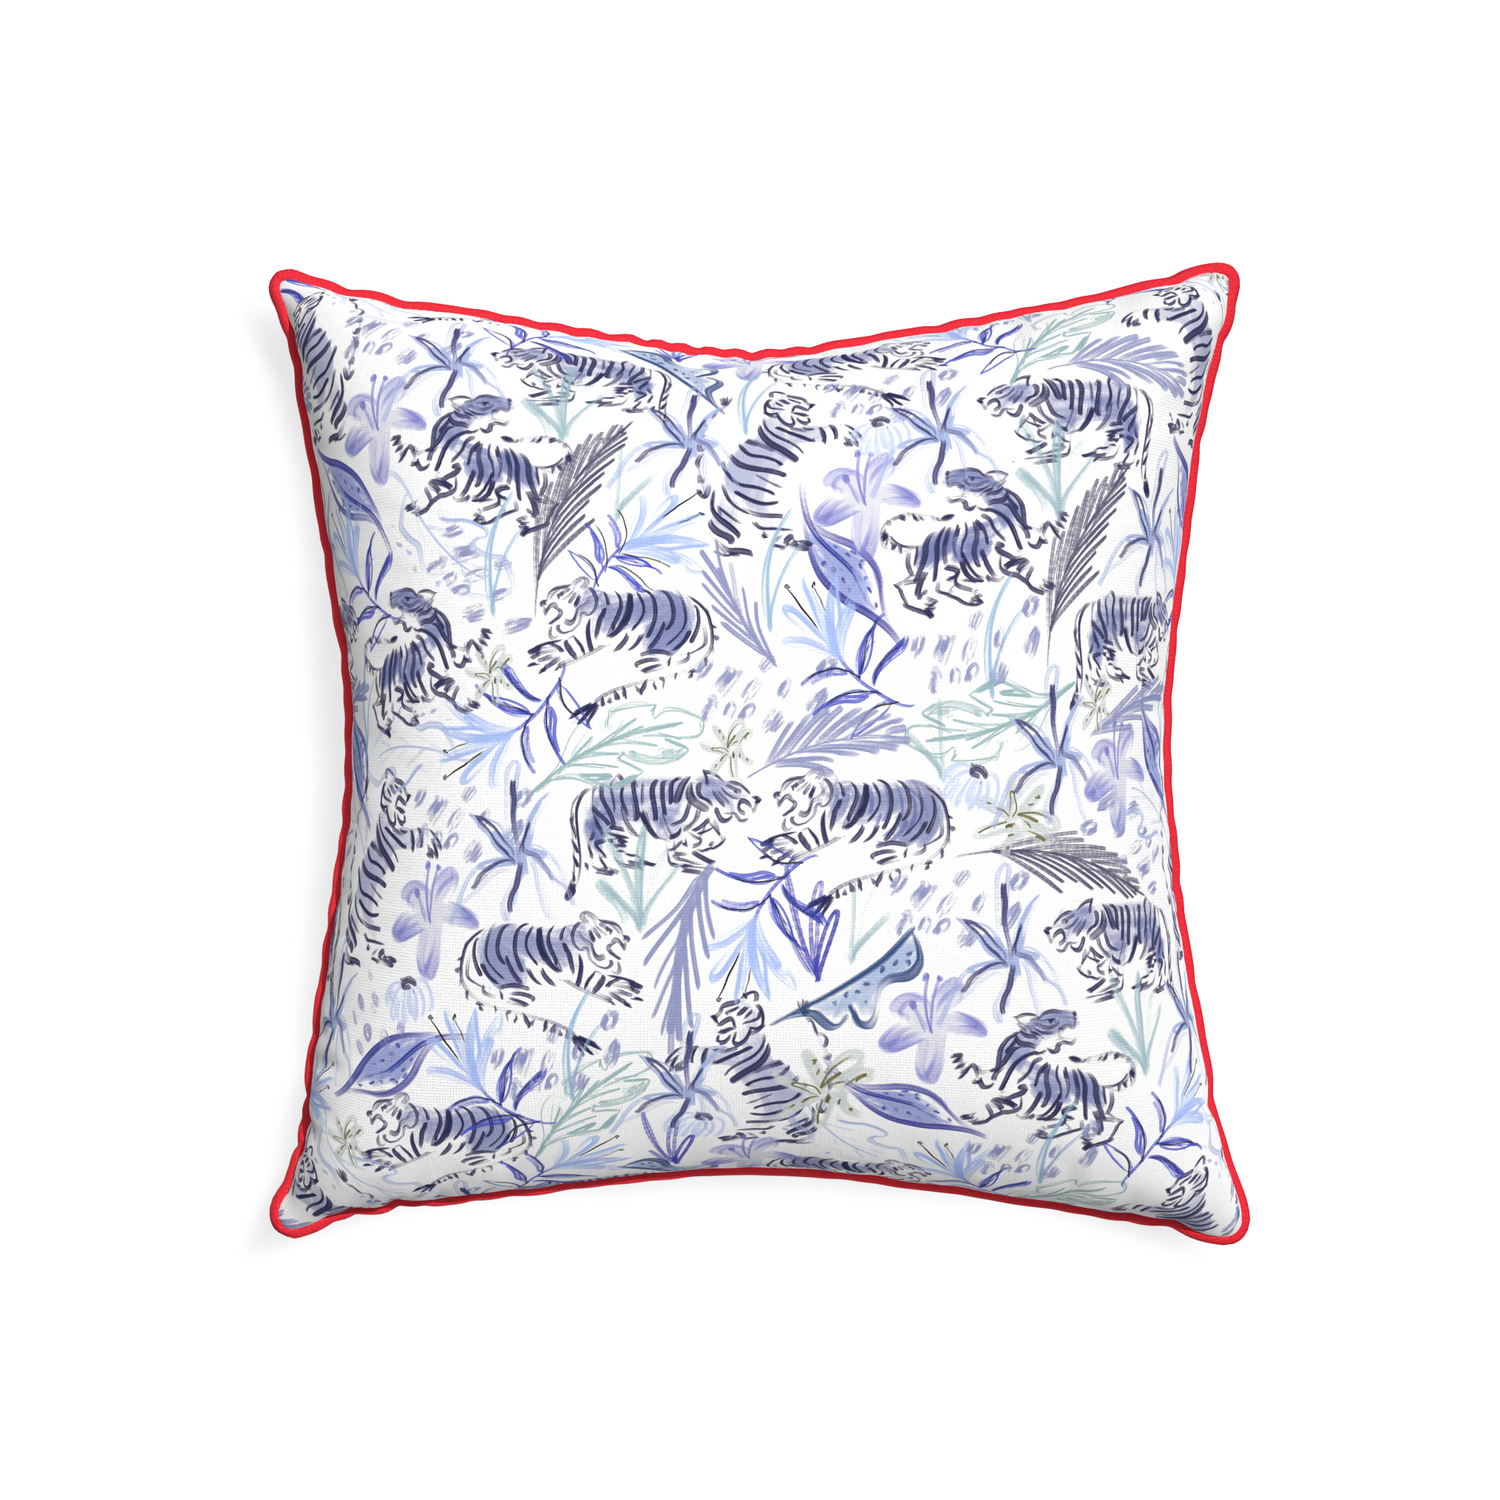 22-square frida blue custom blue with intricate tiger designpillow with cherry piping on white background